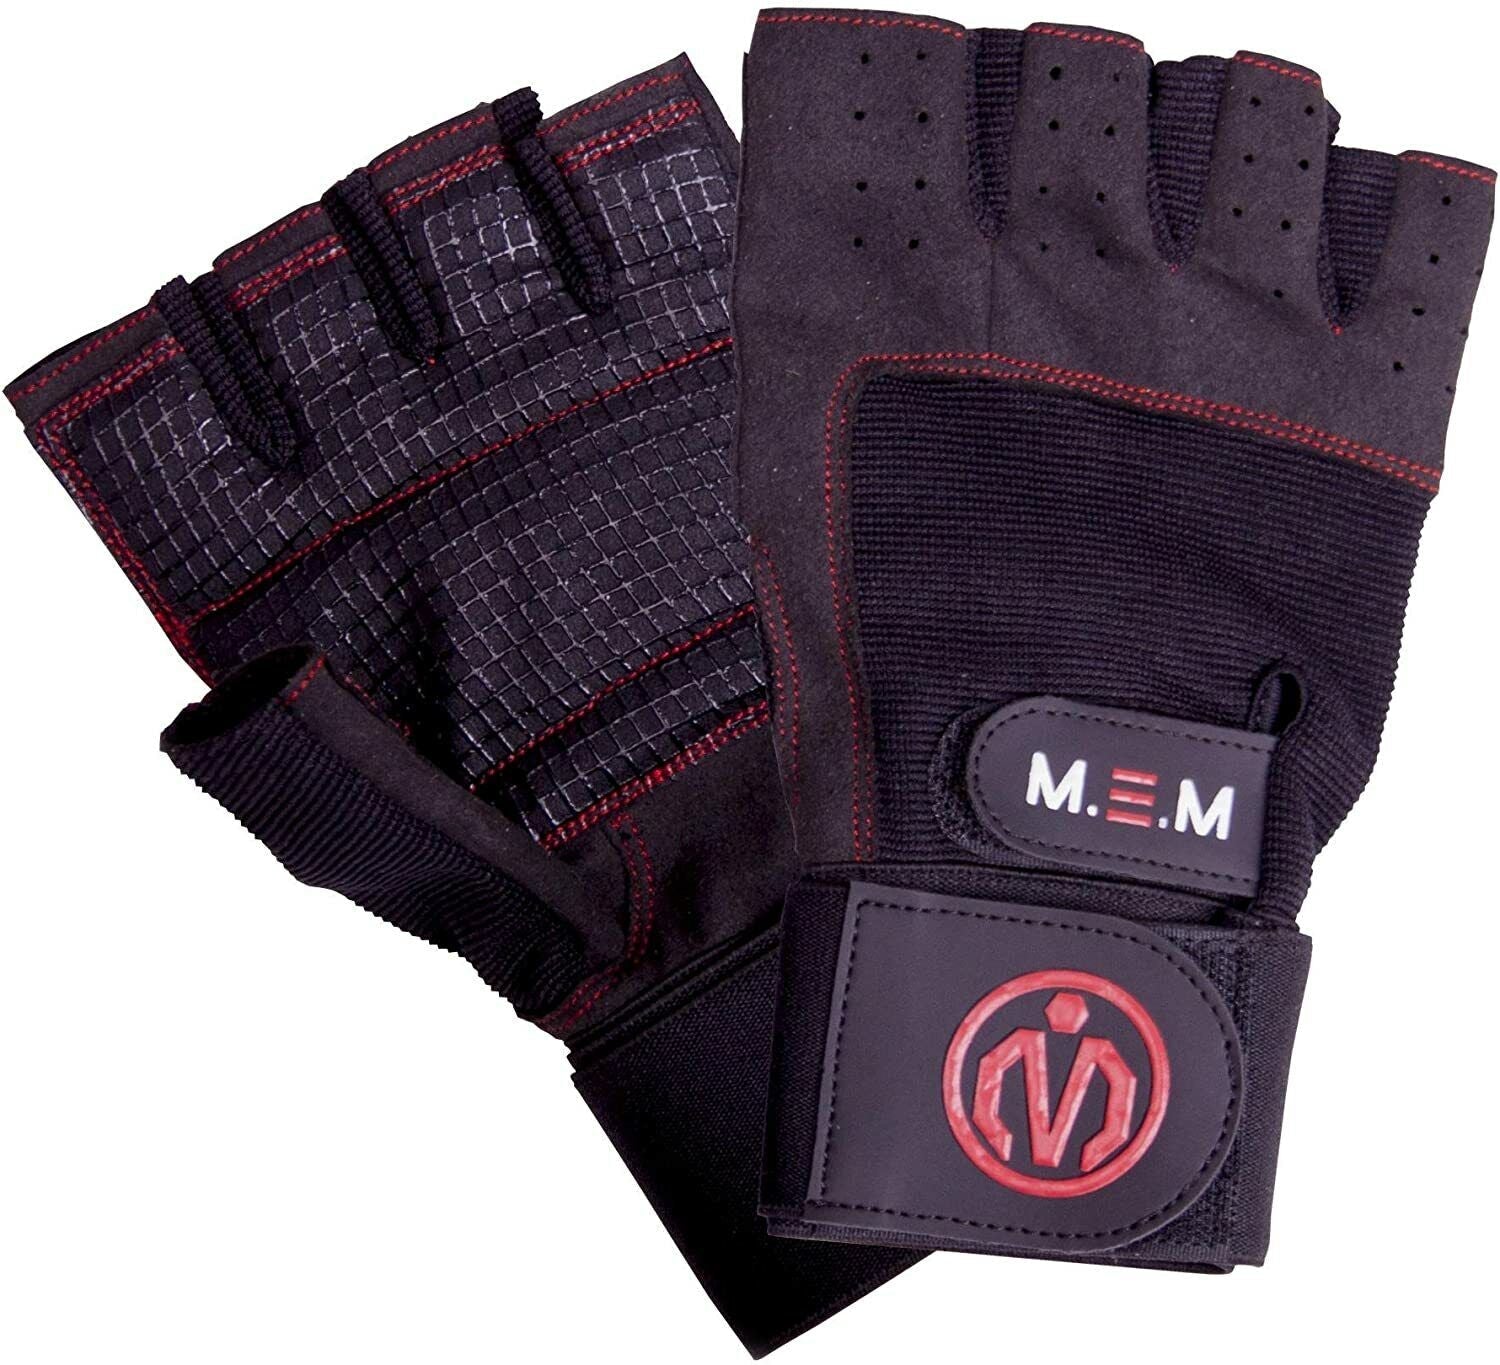 MeM Fitness Men’s Xtreme Fit Weight Lifting Gloves Red/Black